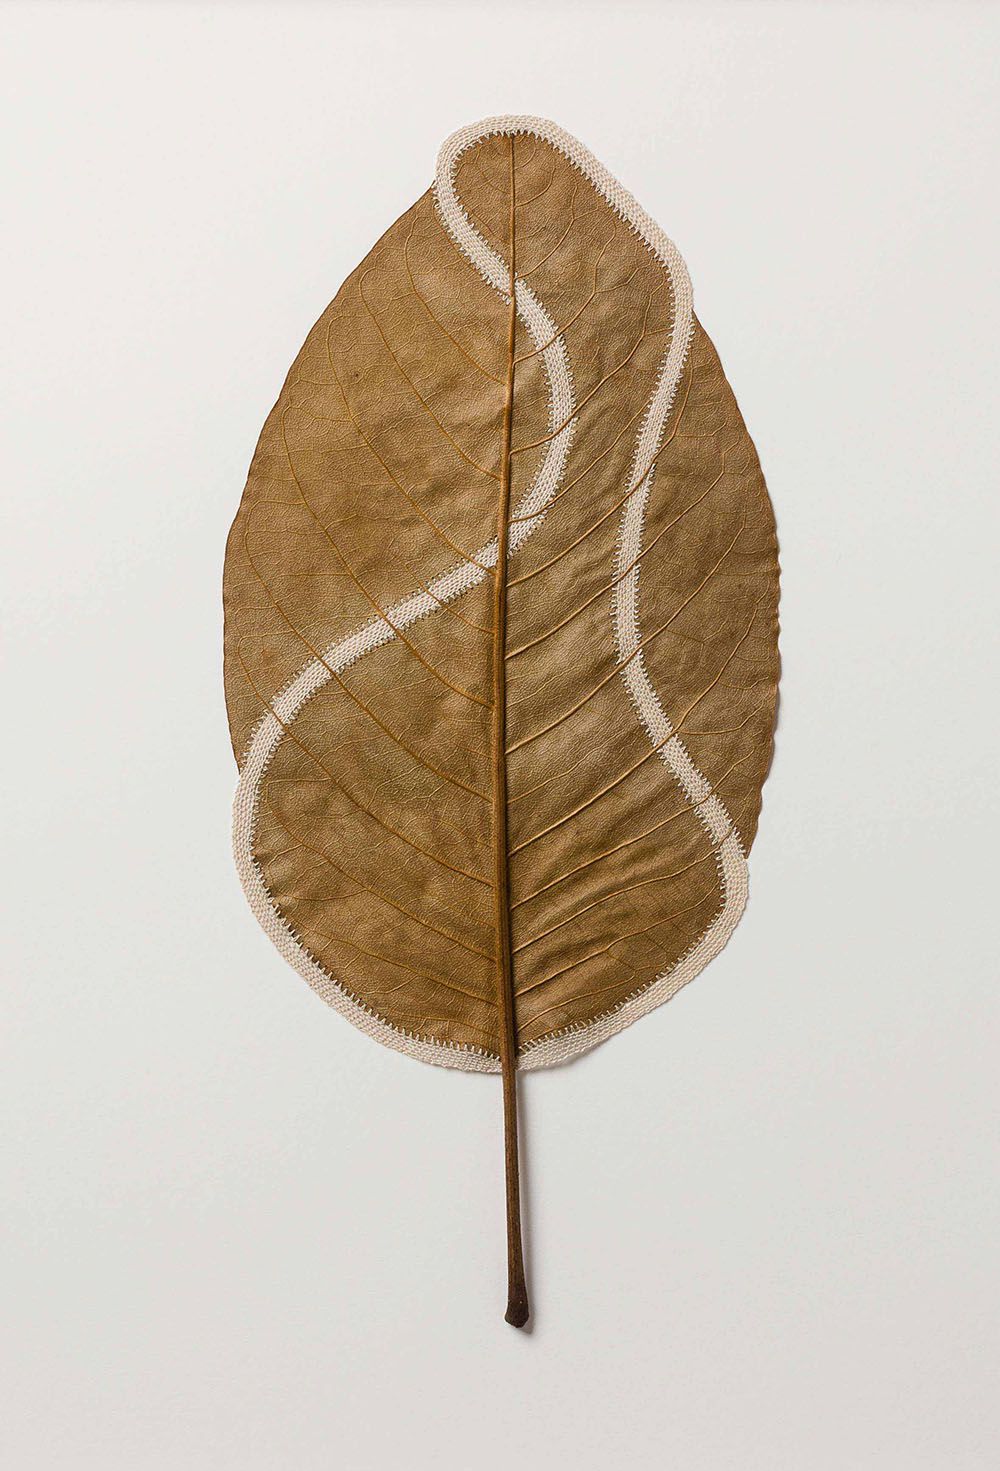 Beautiful Sculptures Of Dried Leaves Crocheted Delicate Patterns By Susanna Bauer 4